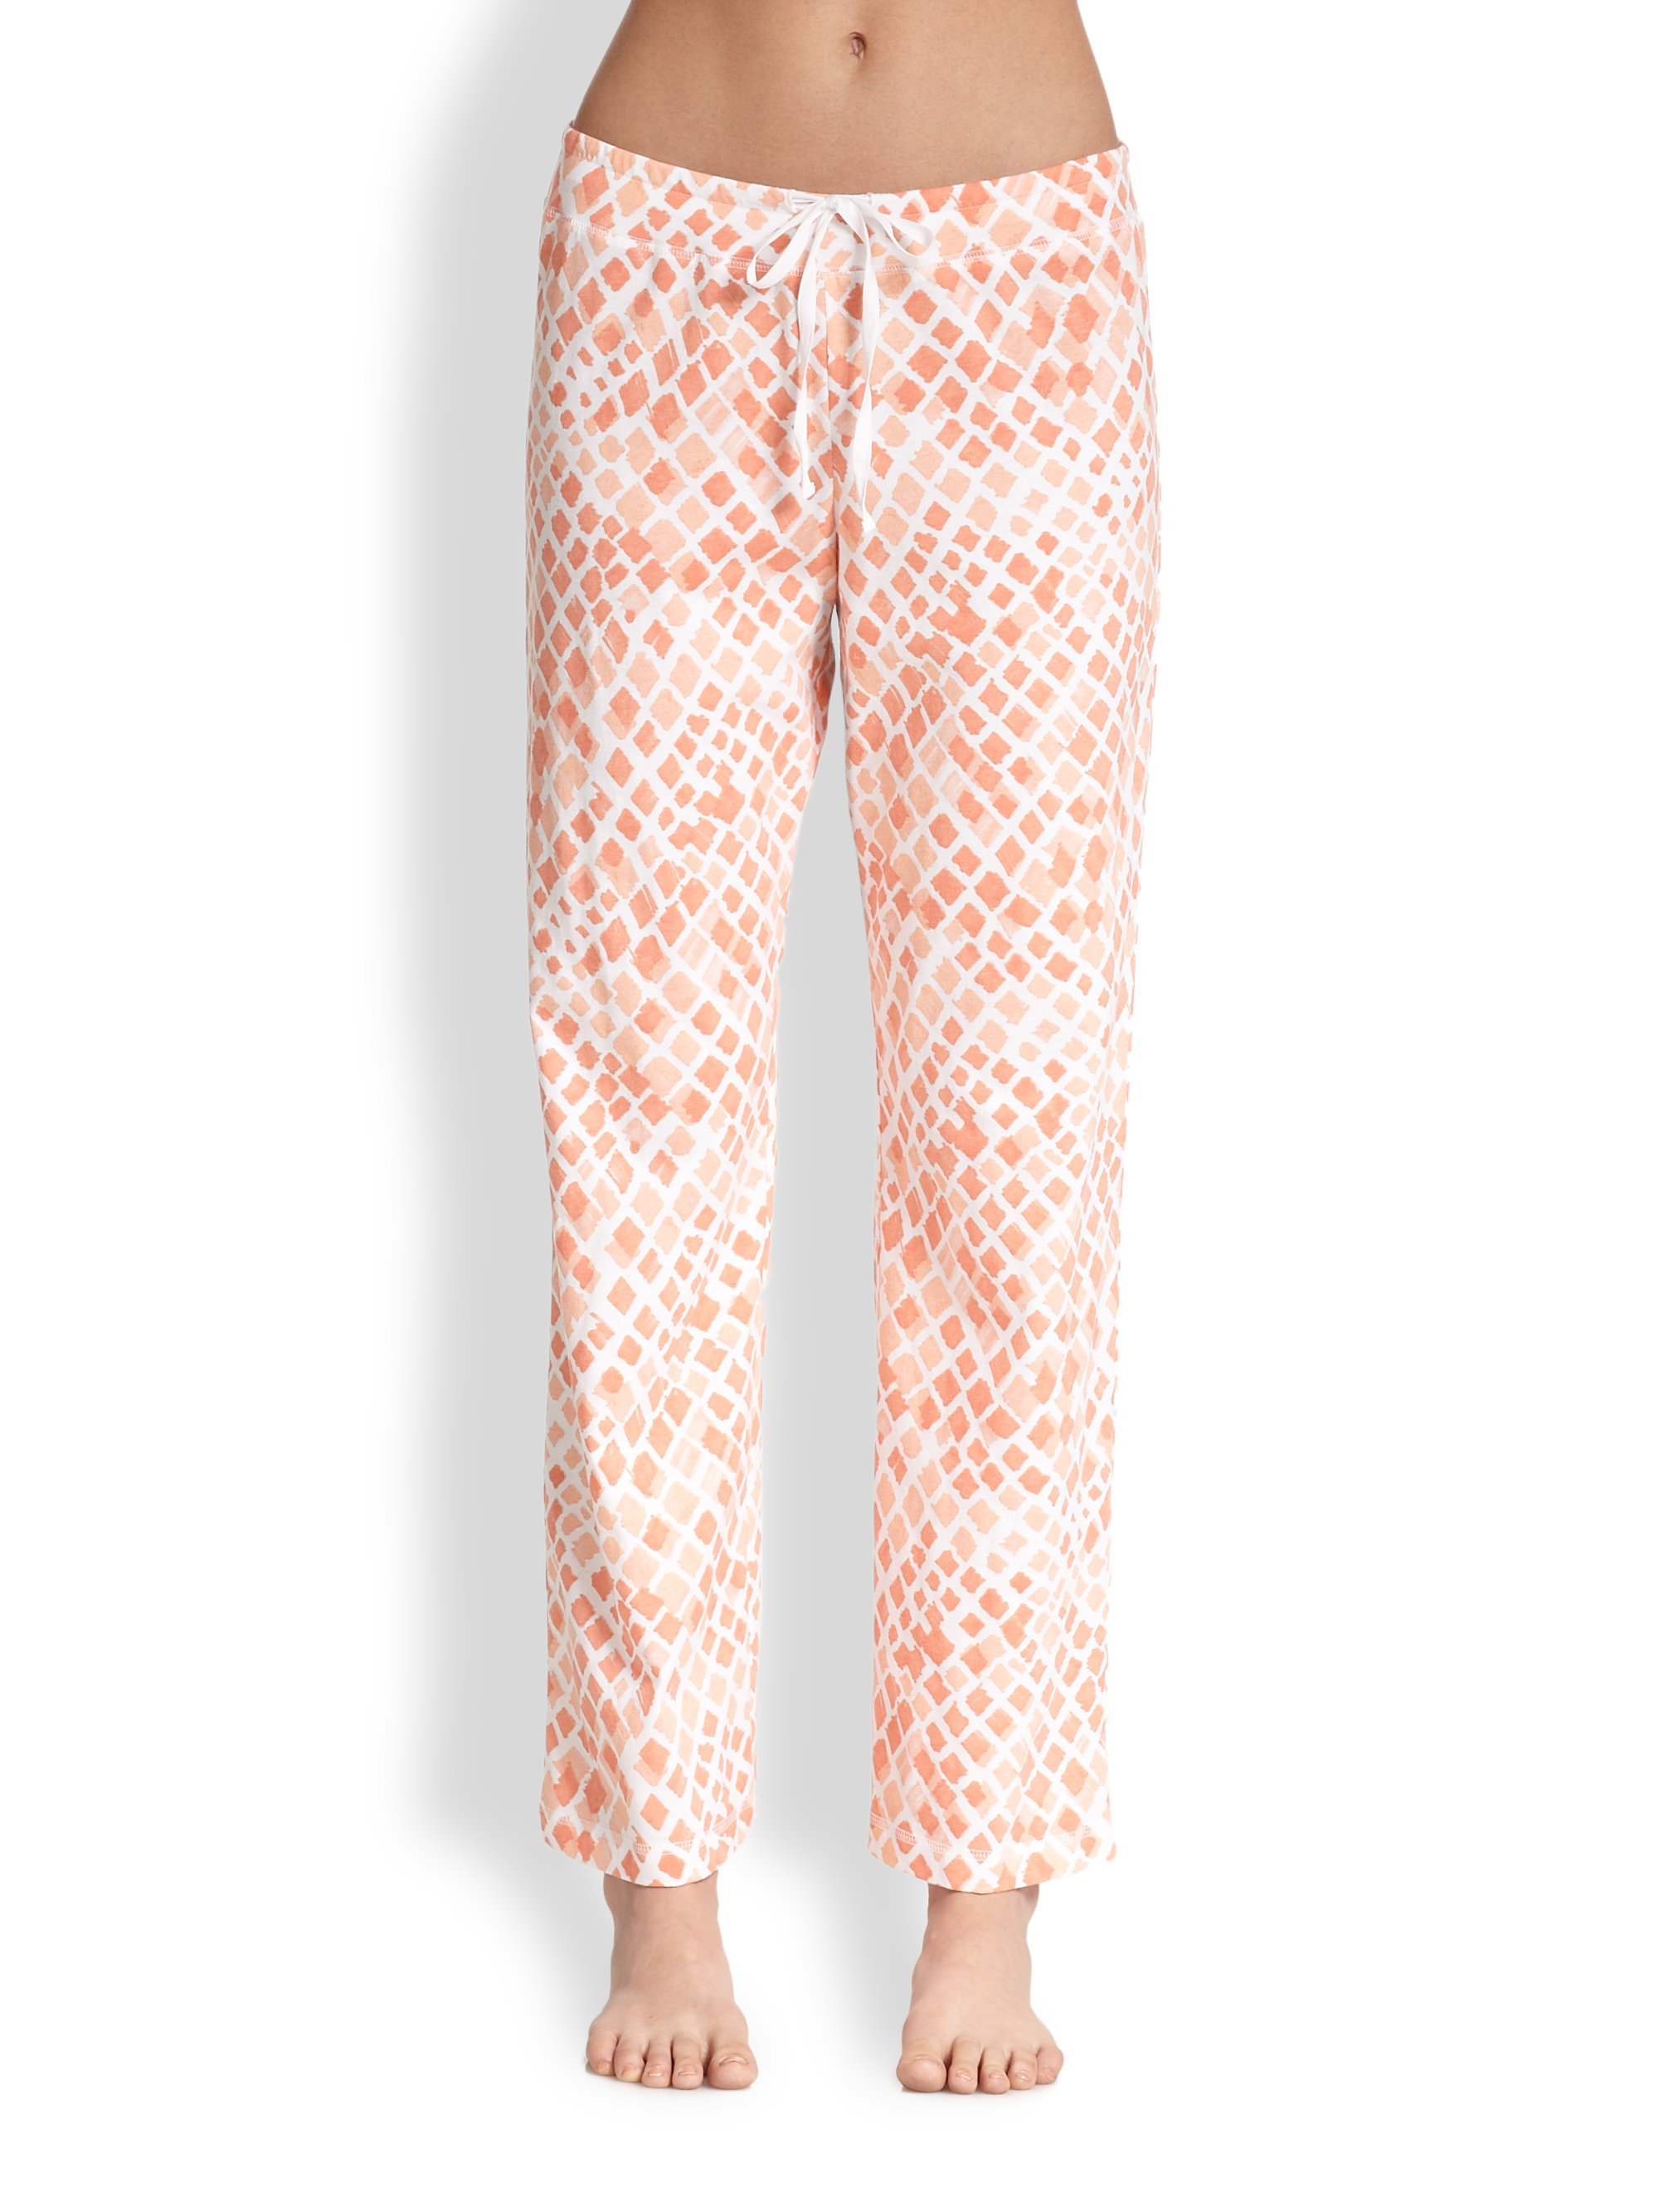 Lyst - Cottonista Cotton Jersey Pajama Pants in Pink